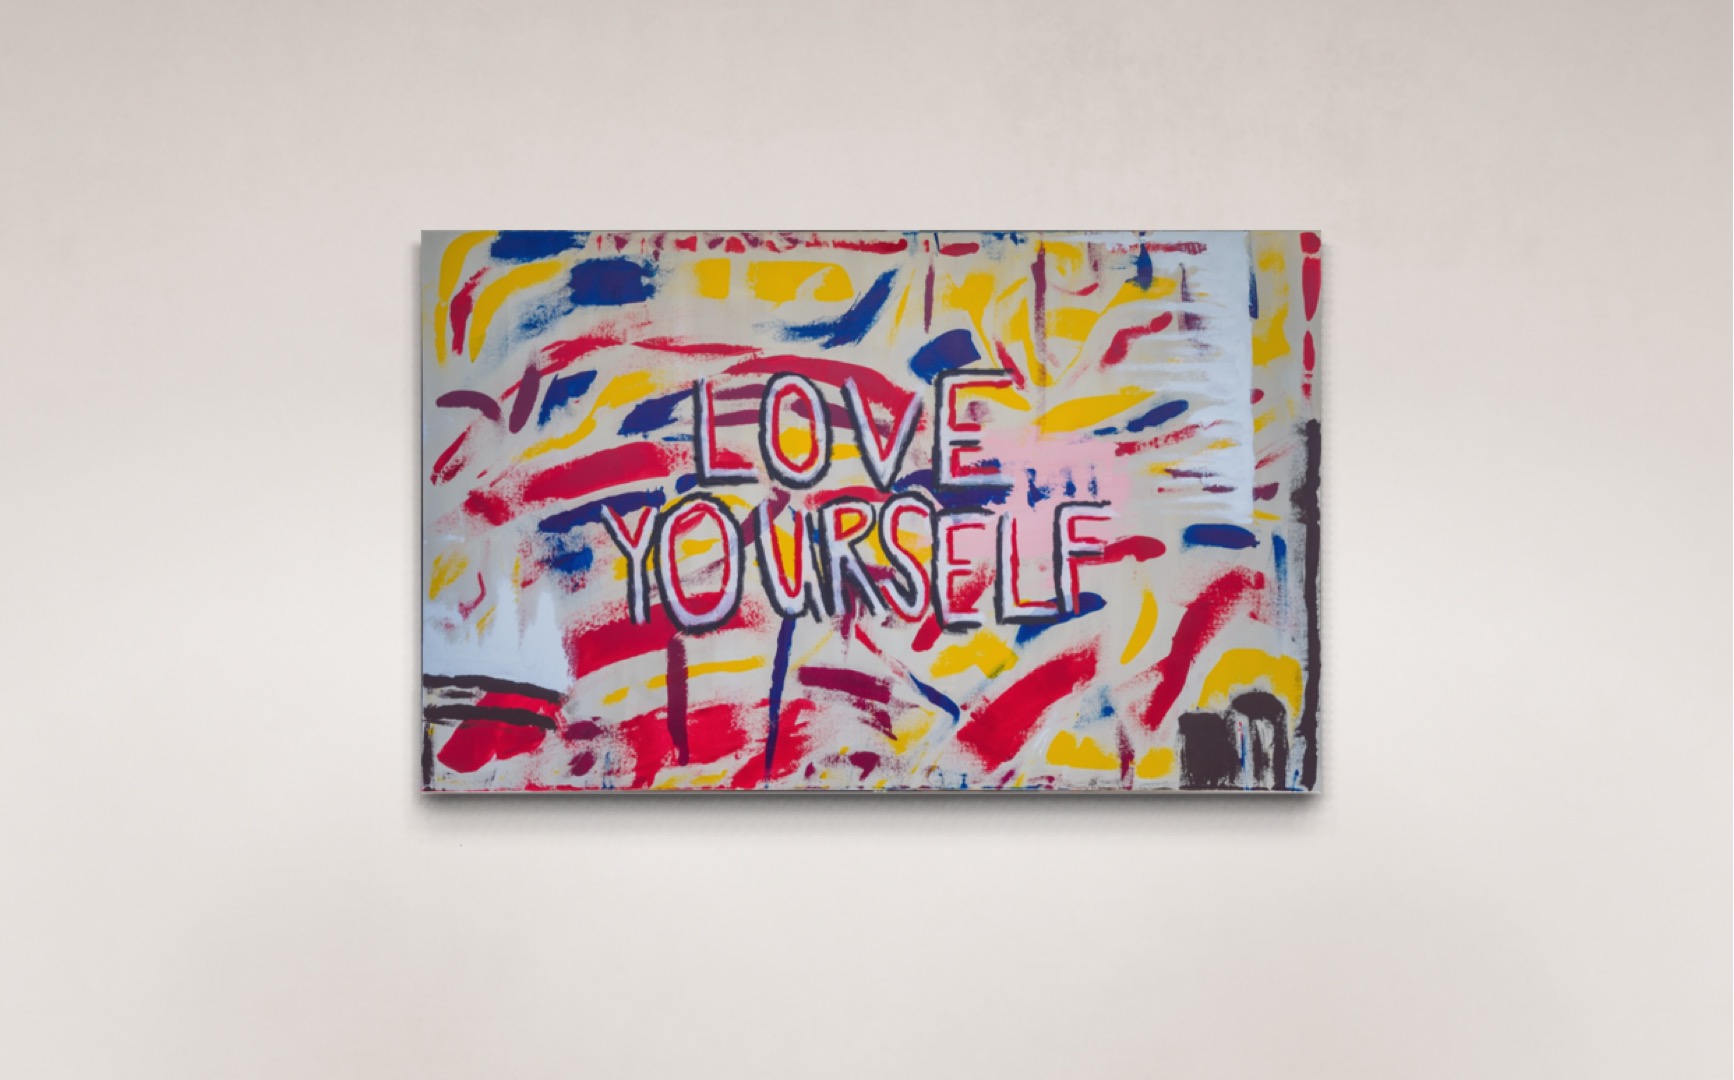 Love Yourself acrylic on canvas with oil stick art for sale by Uzoma Obasi